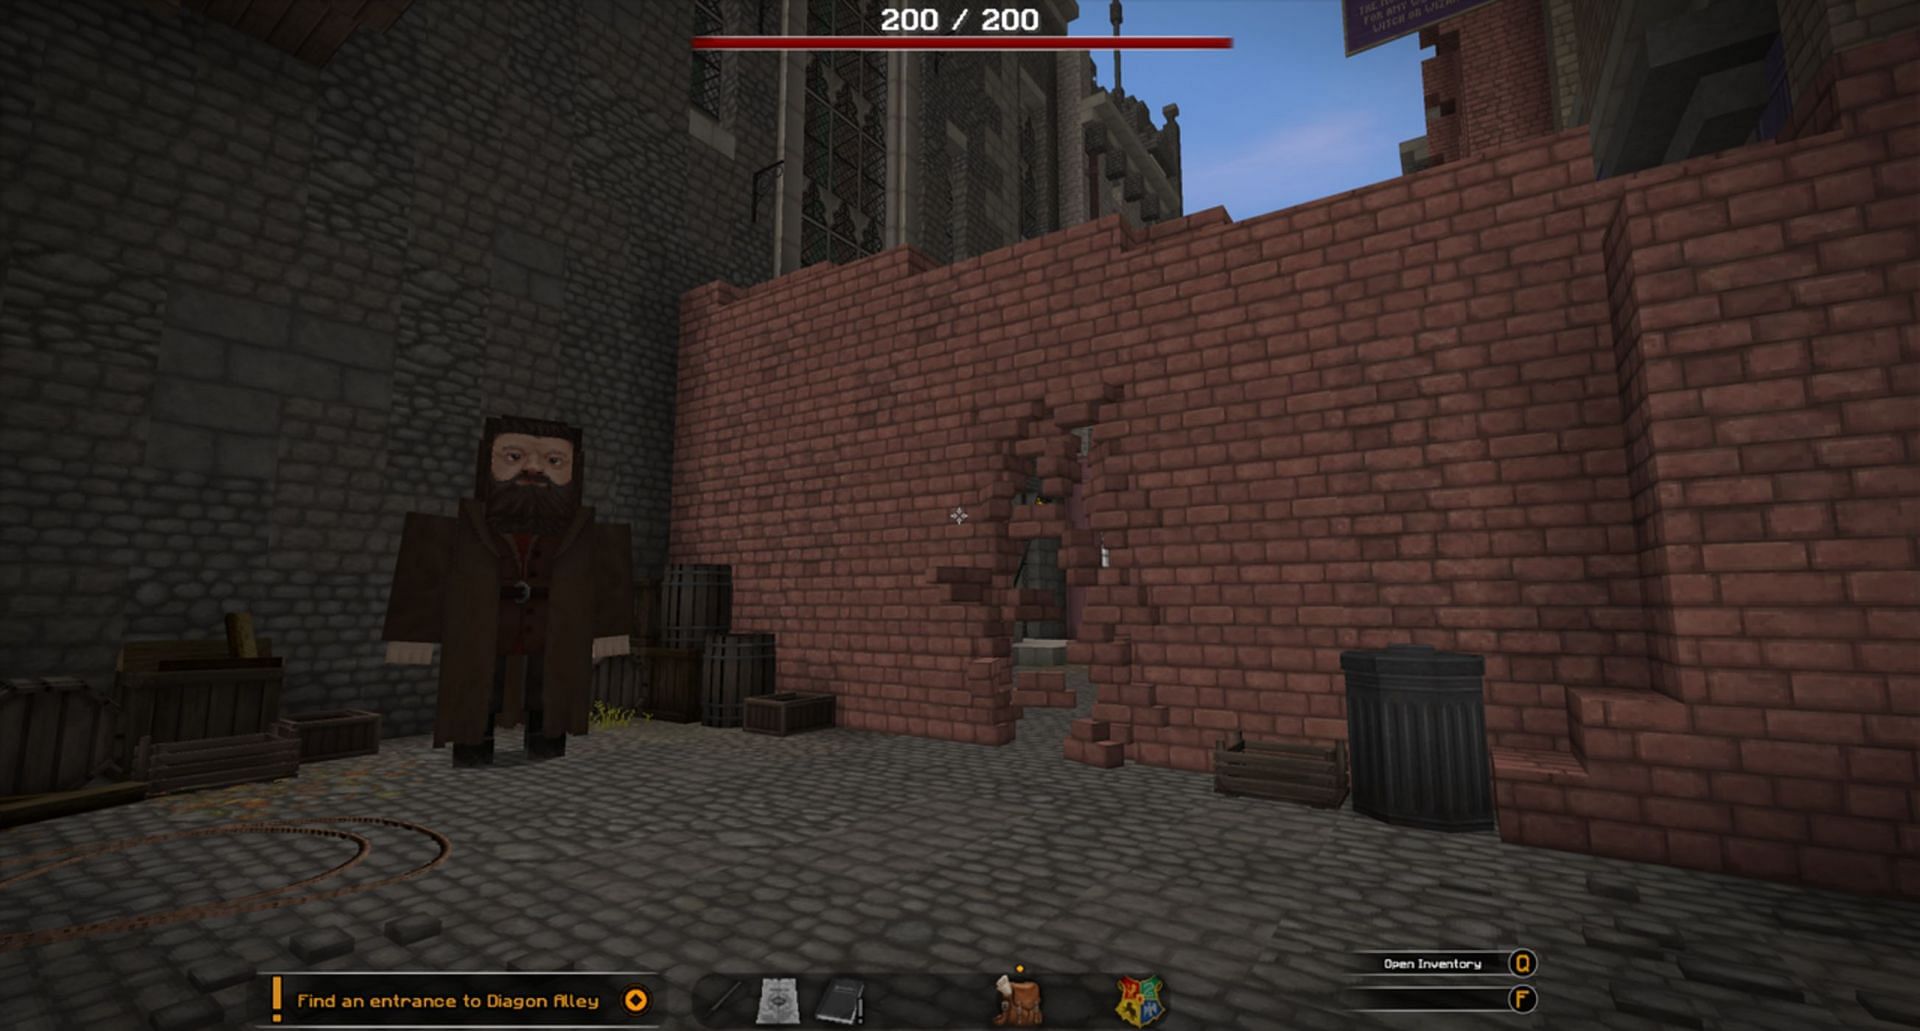 A player enters Diagon Alley in Witchcraft and Wizardry (Image via The Floo Network/PlanetMinecraft)